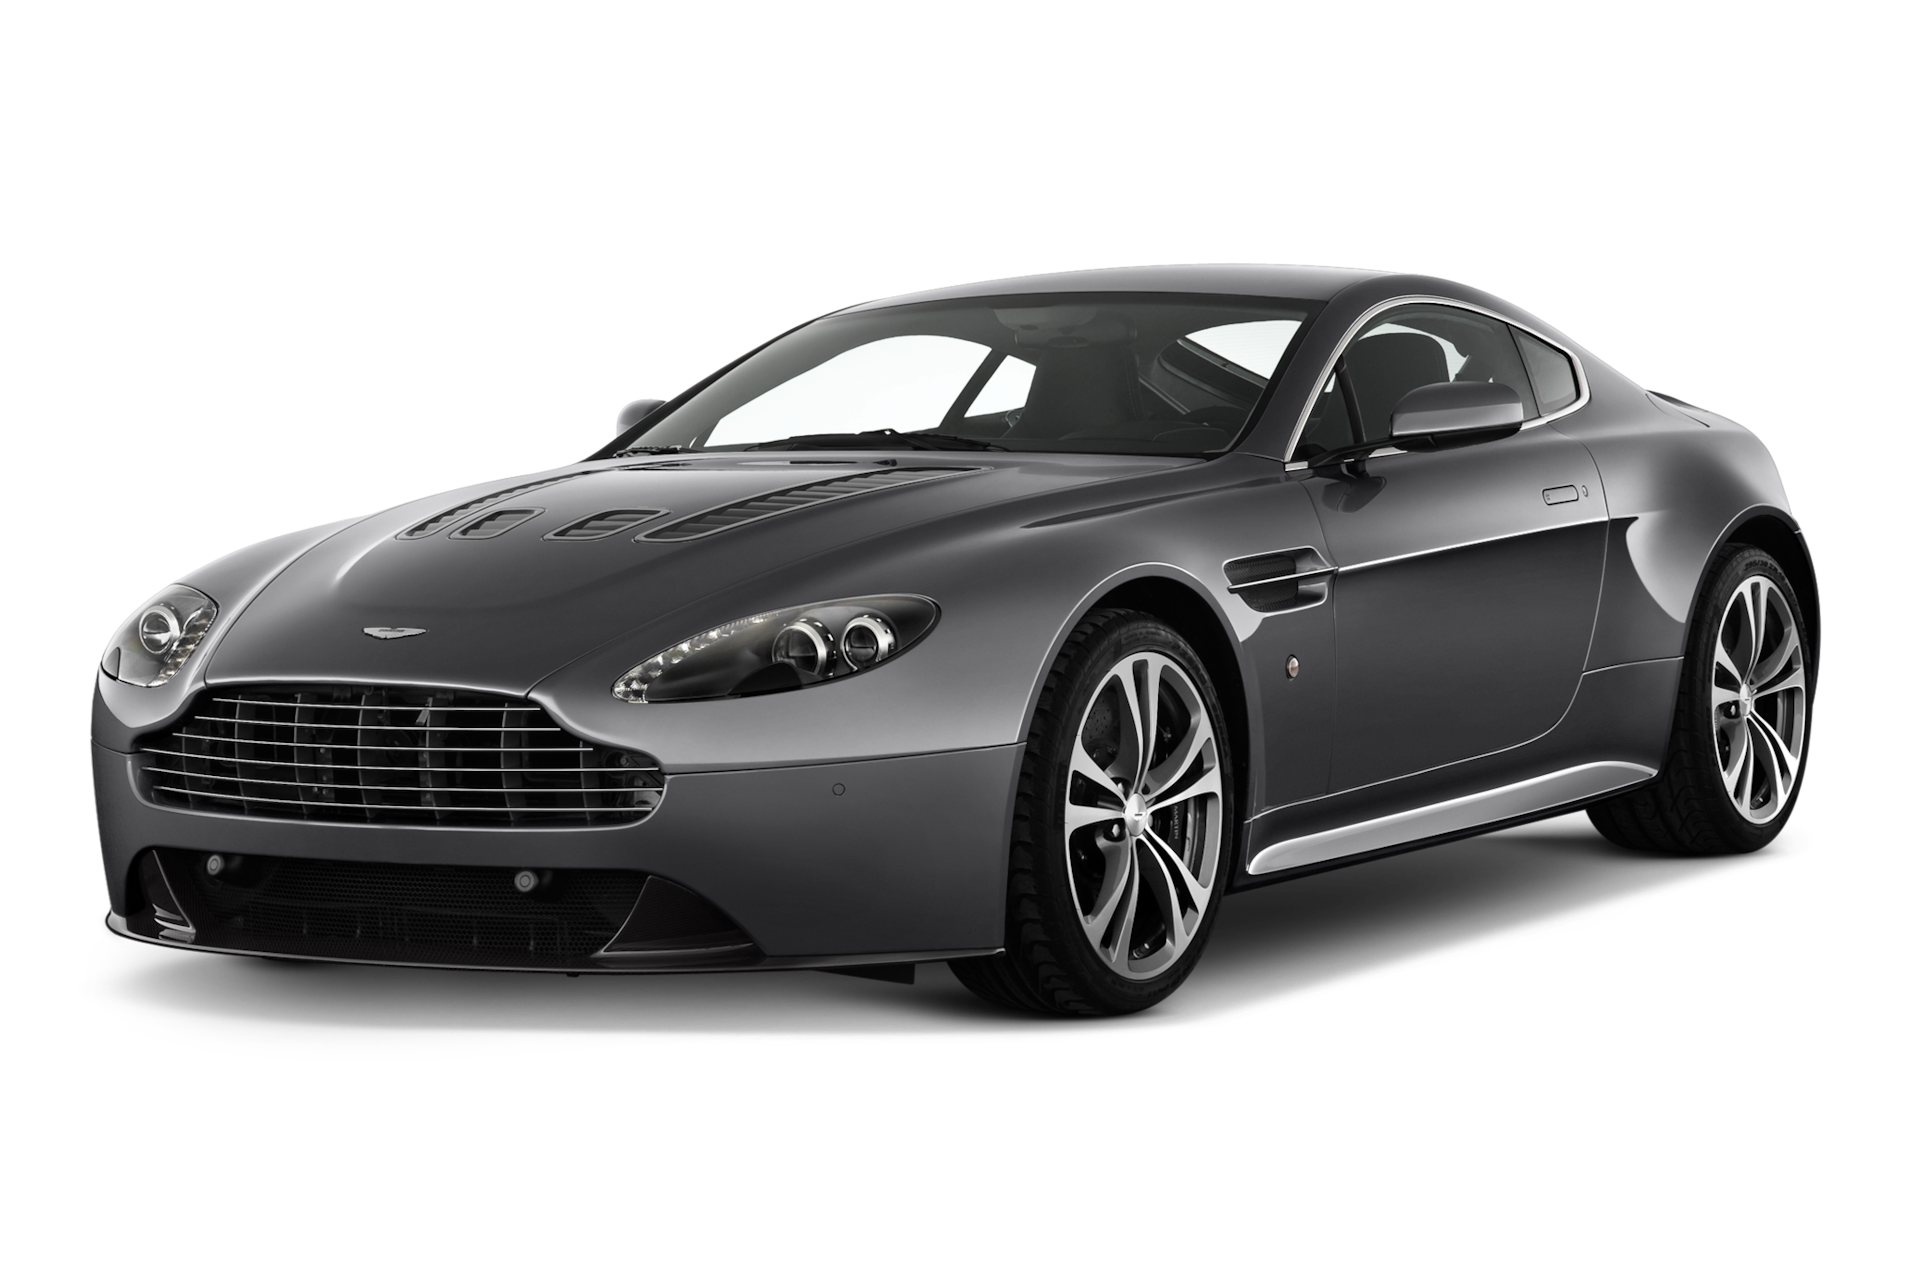 2012 Aston Martin V12 Vantage Prices, Reviews, and Photos - MotorTrend